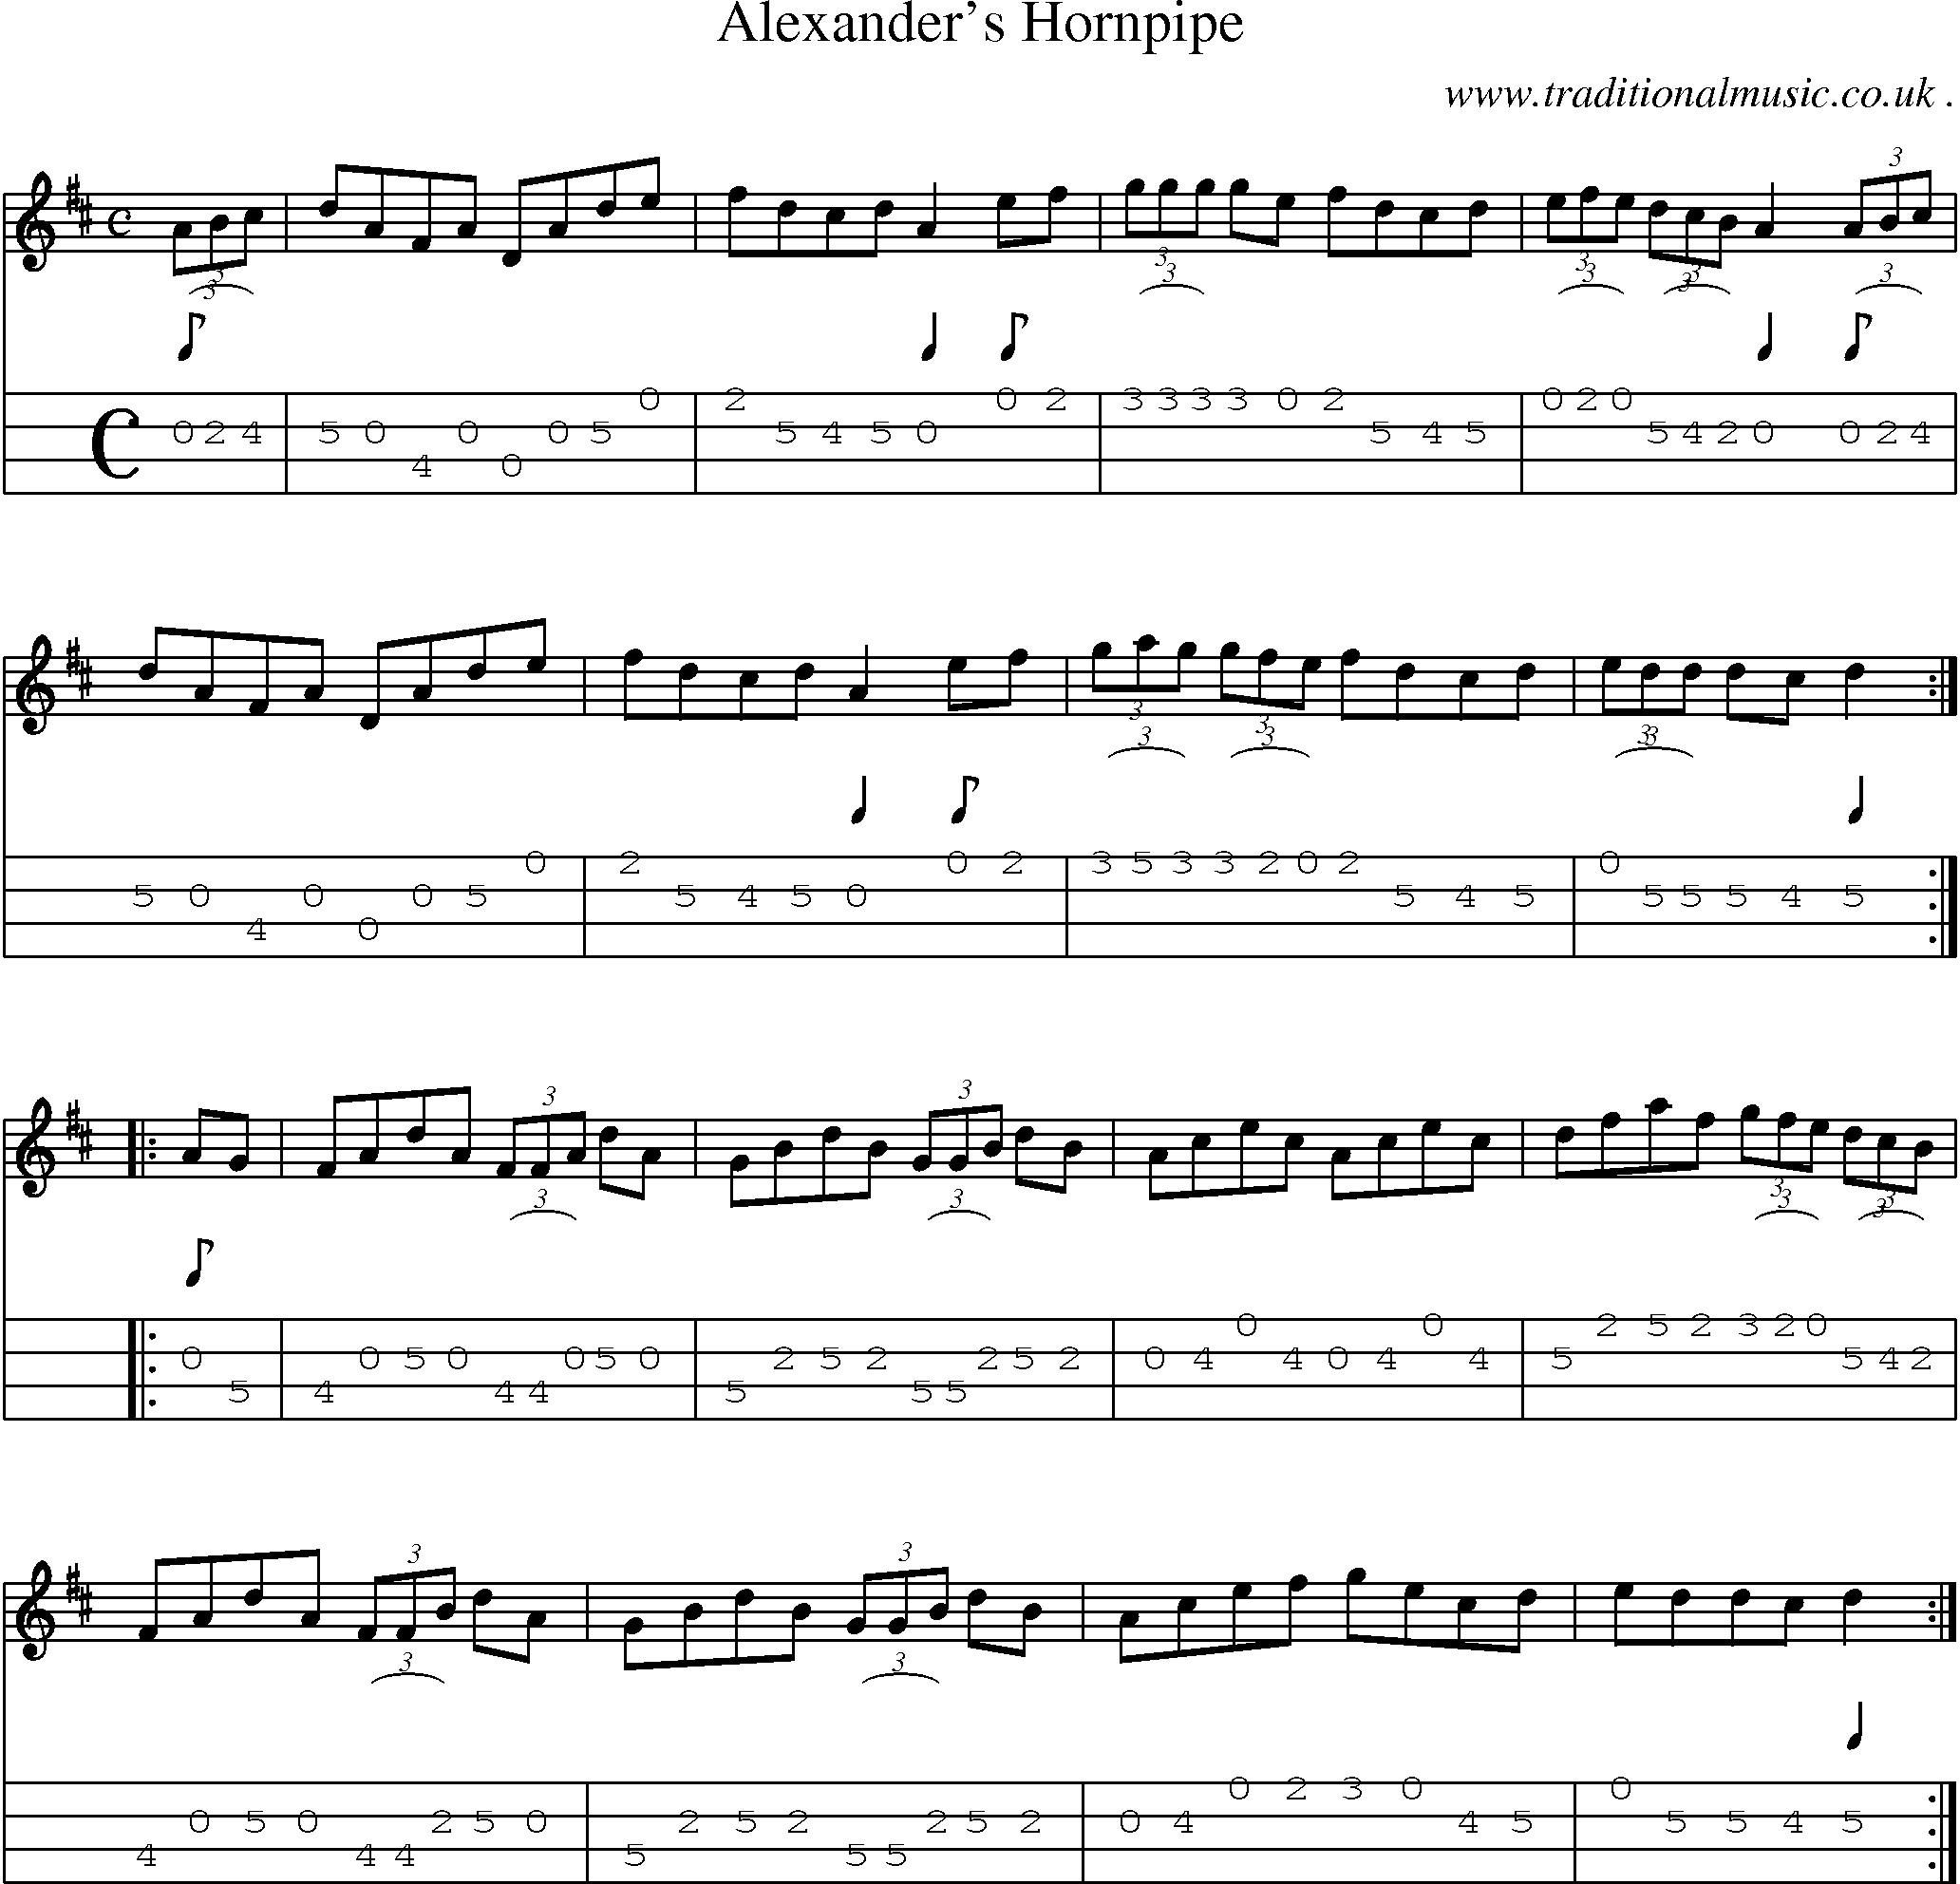 Sheet-music  score, Chords and Mandolin Tabs for Alexanders Hornpipe